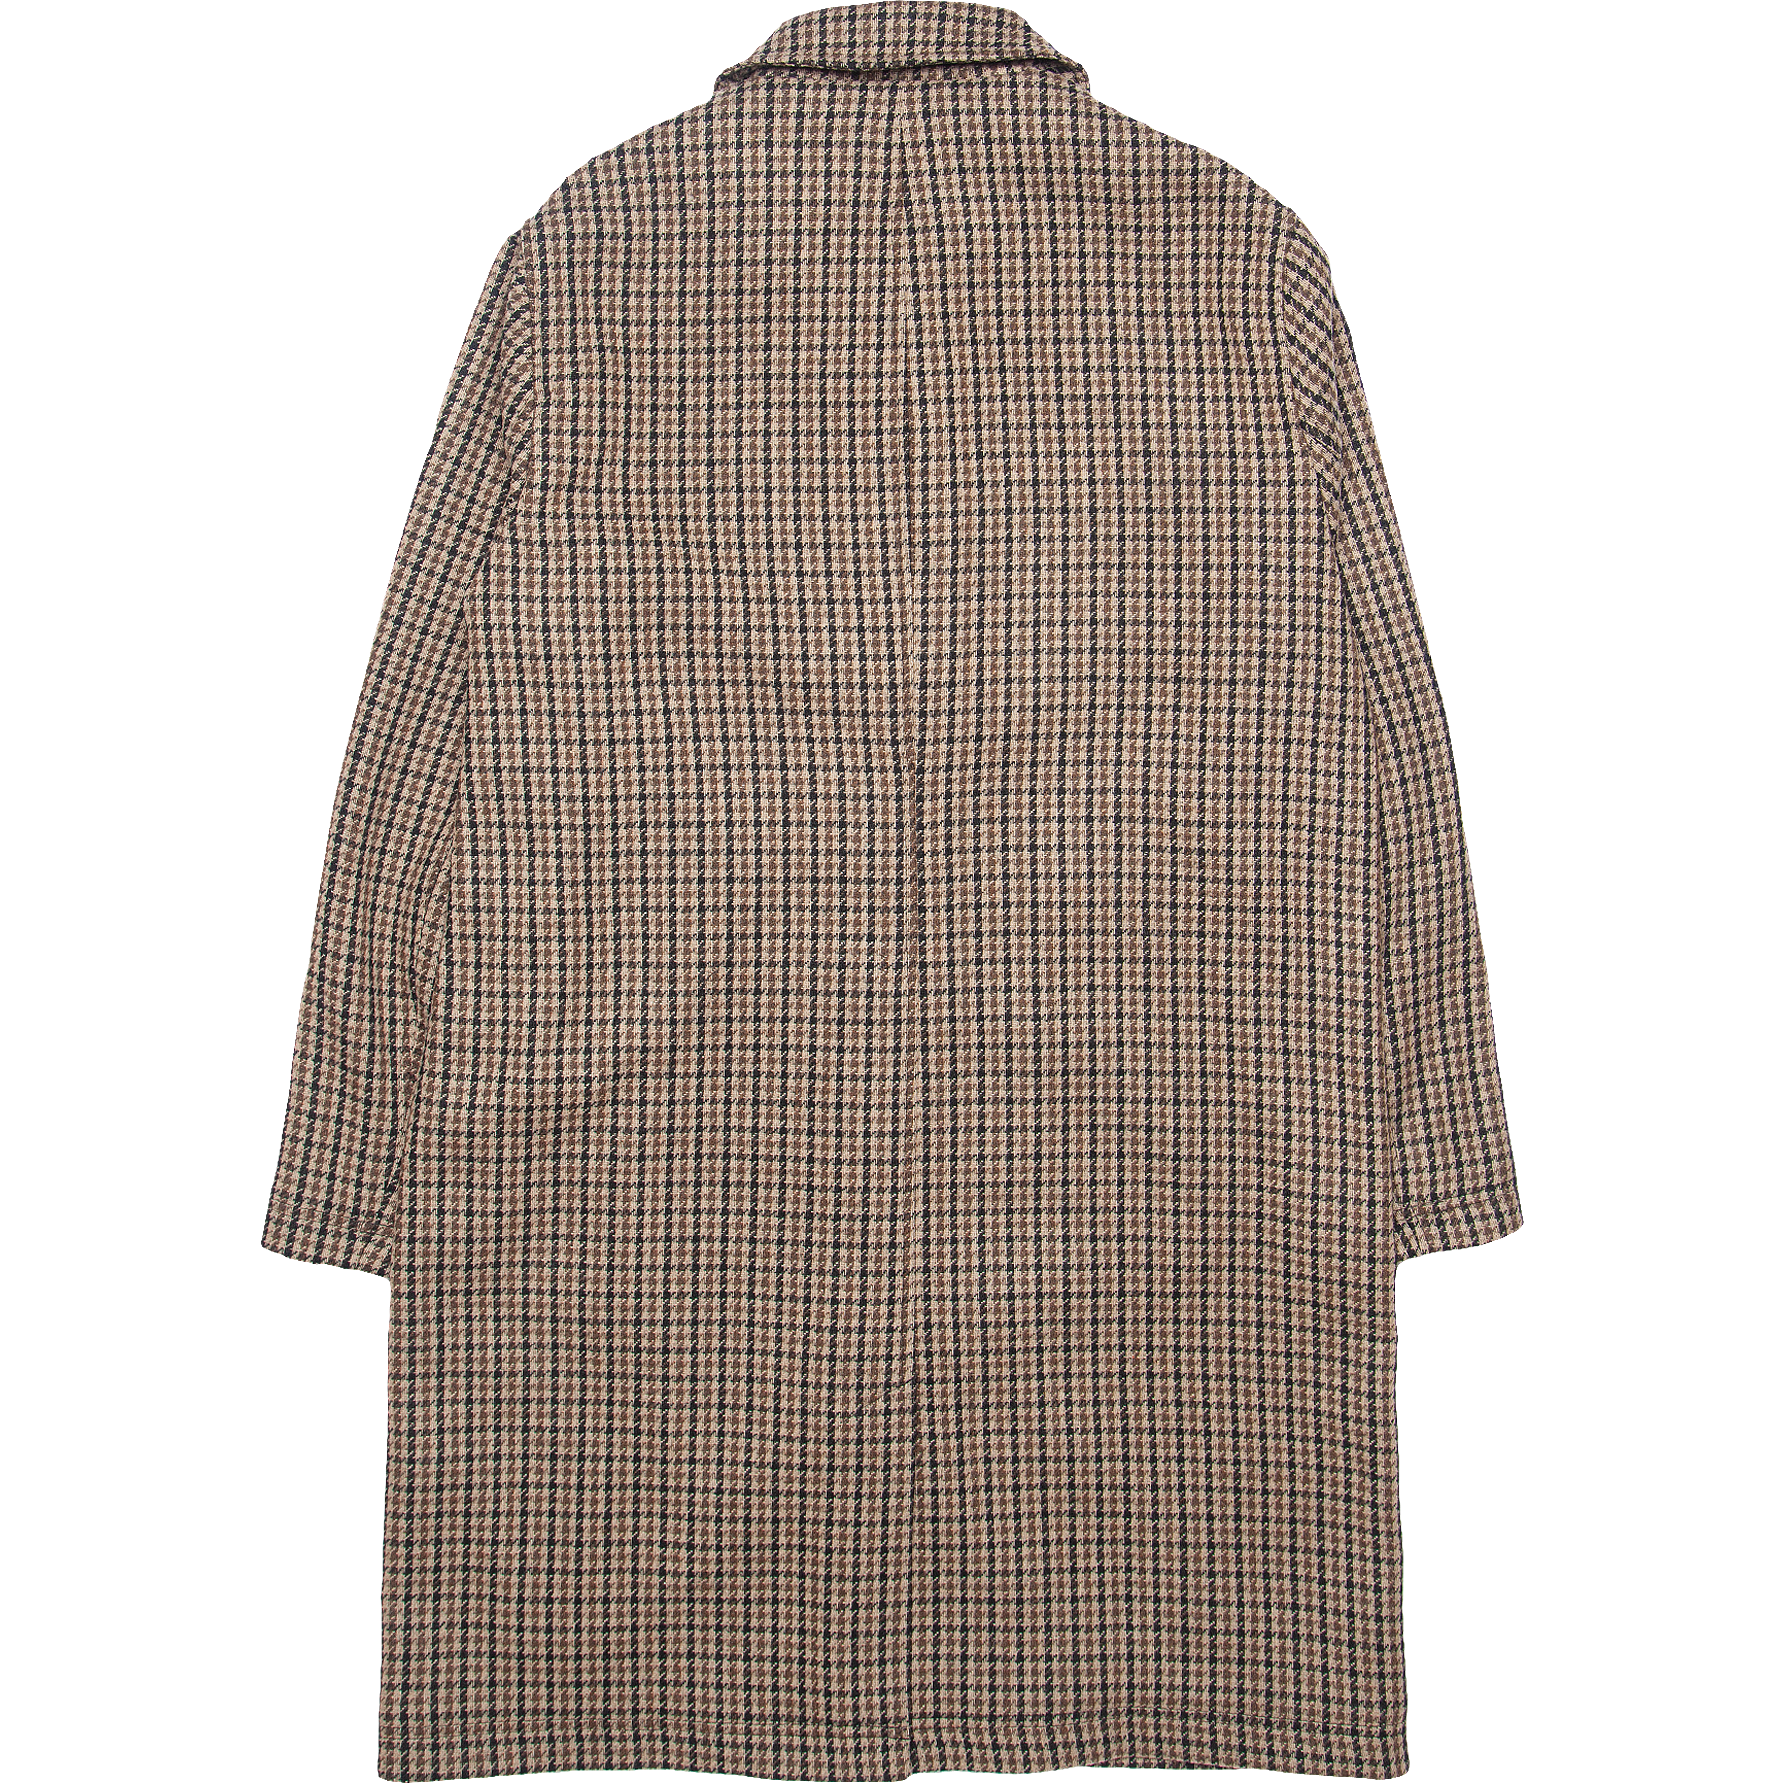 Chester Coat - Natural Houndstooth